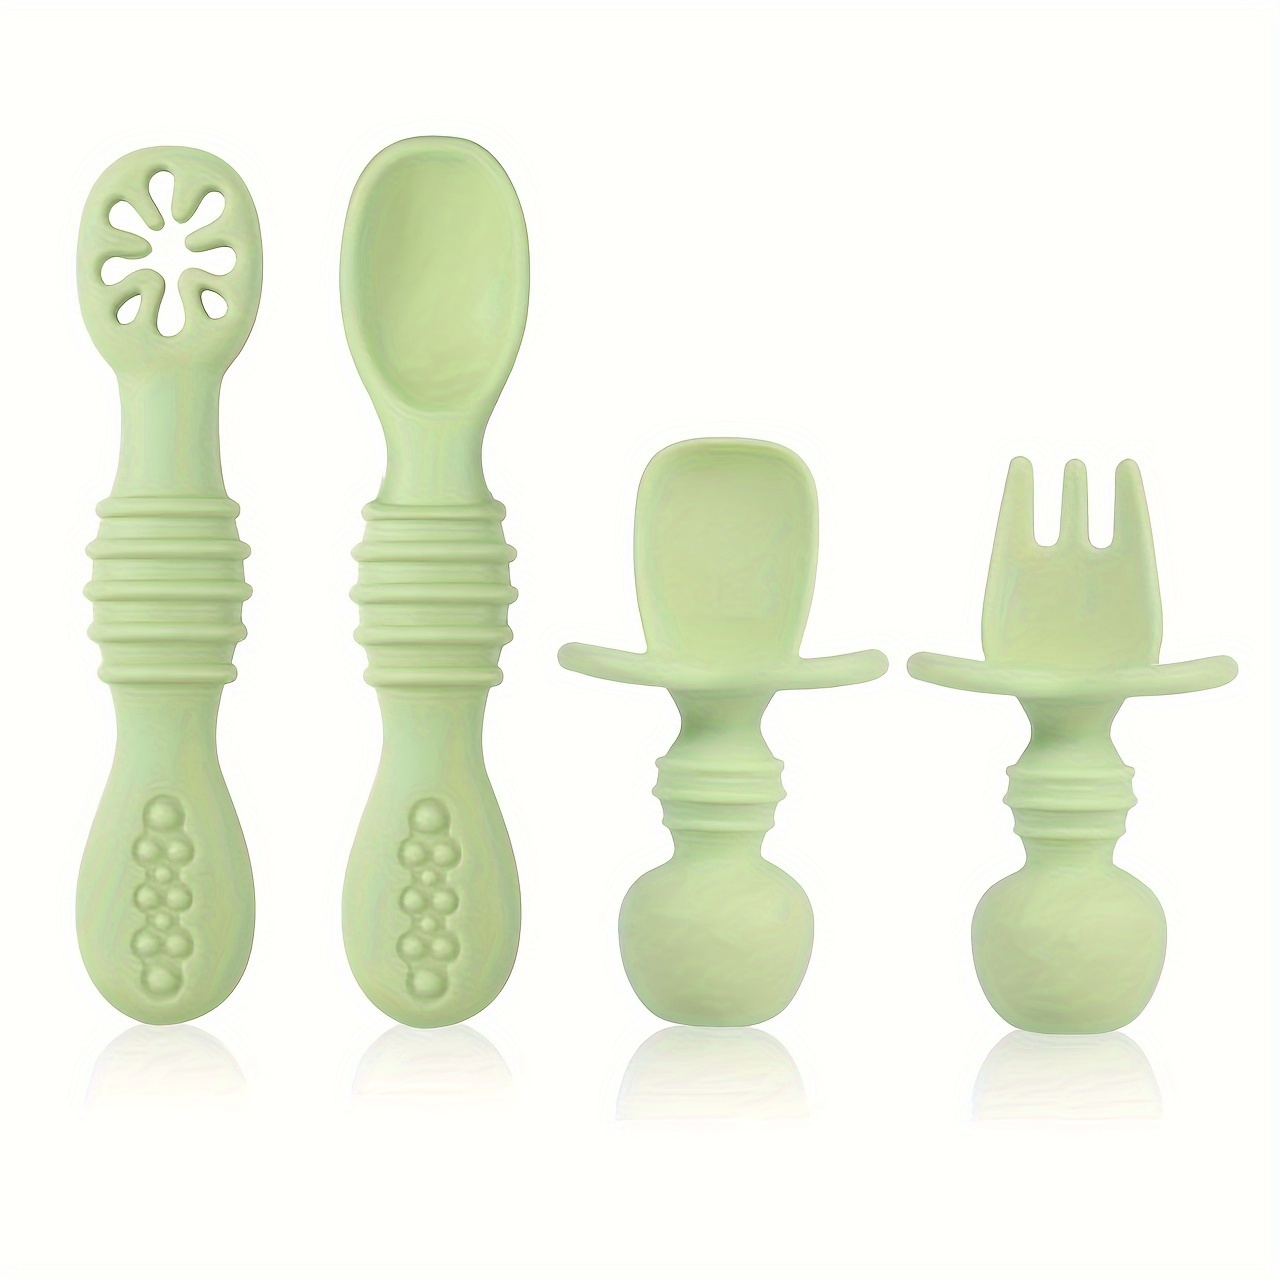  4 Pcs Baby Spoons Self Feeding 6 Months, Silicone Baby Spoons  First Stage, Toddler Utensils for Baby Led Weaning with 2 Cases (Yellow,  Green) : Baby